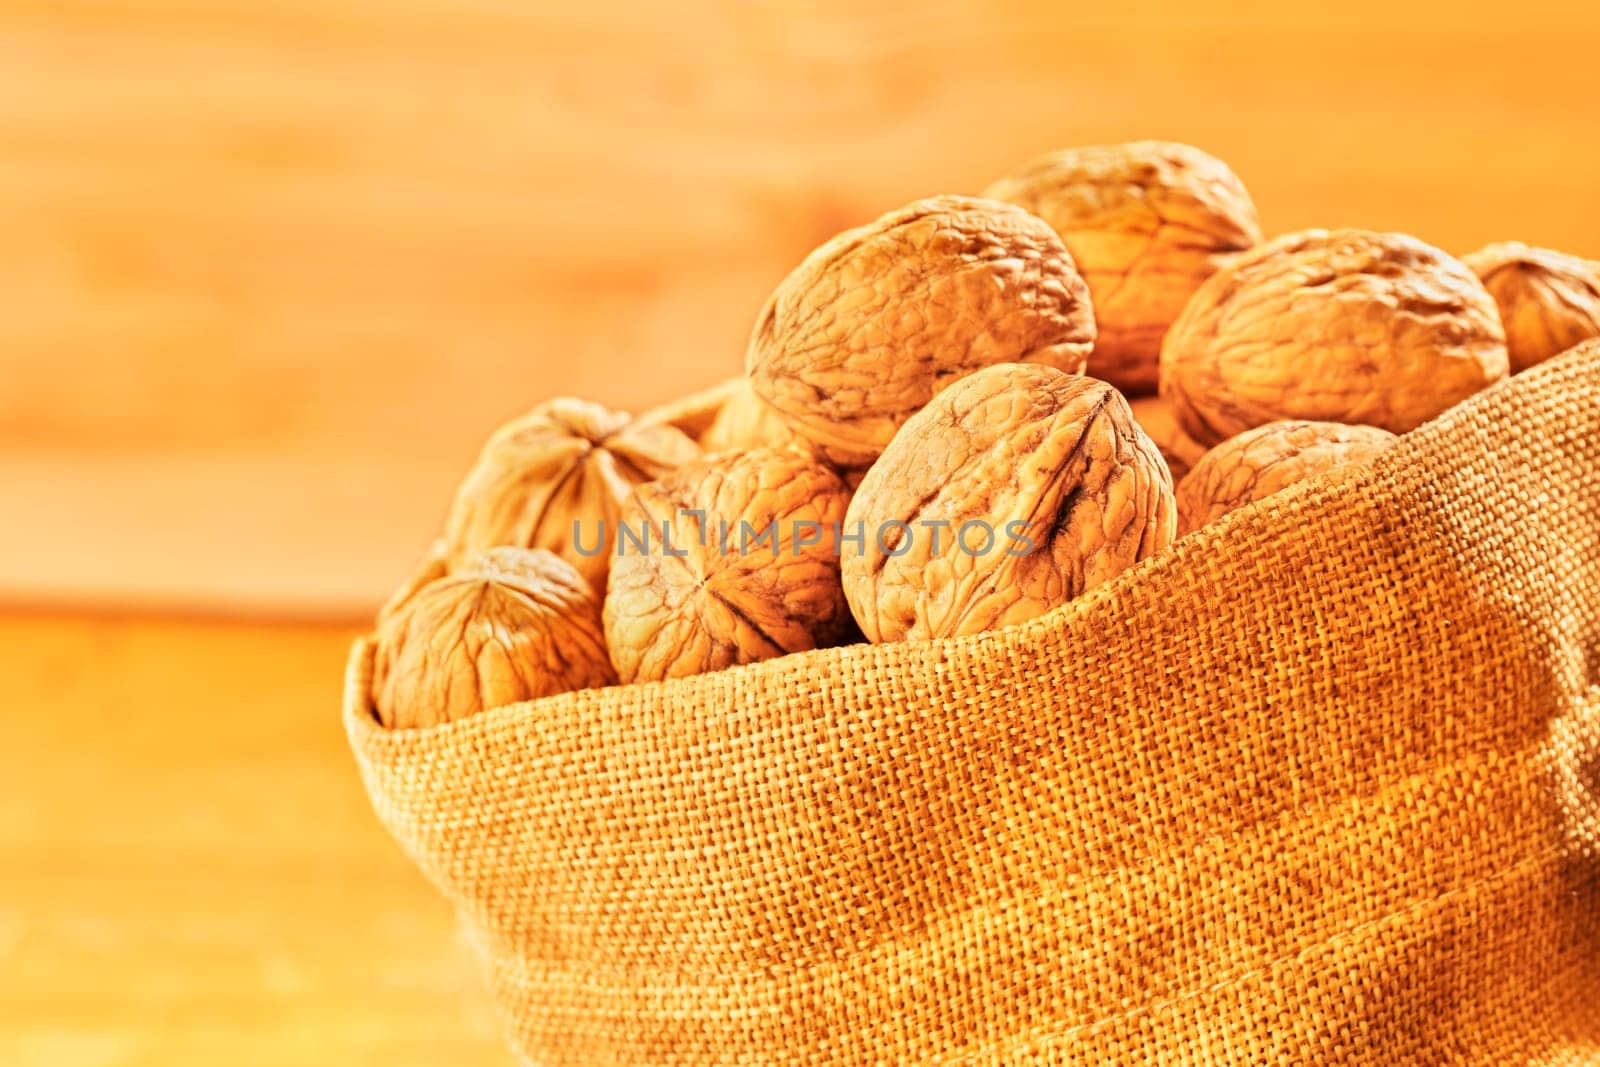 Fruit of walnuts in brown bag, healthy eating ,nutritional supplement